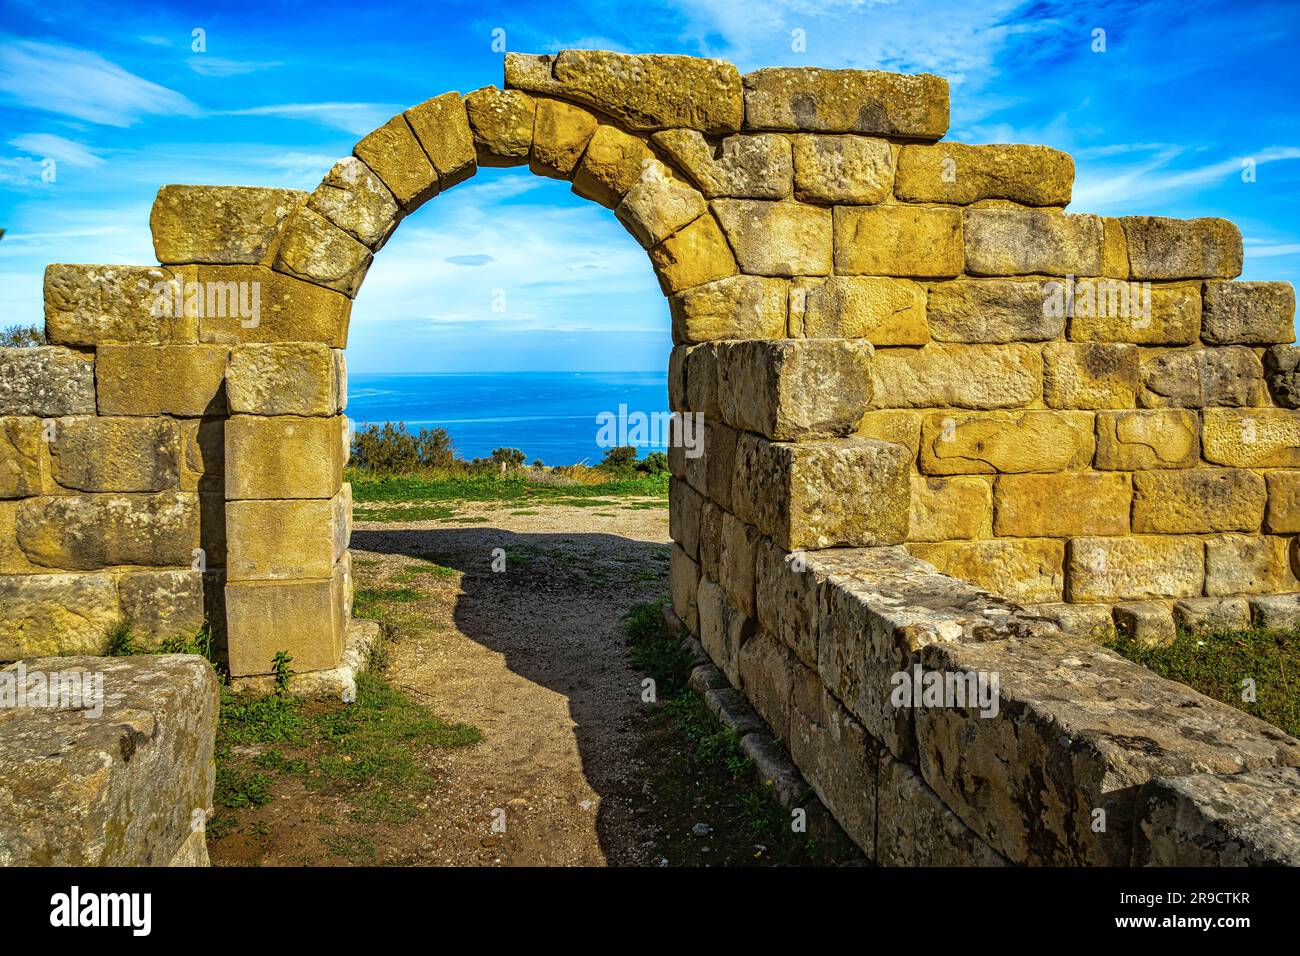 The sea of Sicily seen through the access arch to the Greek-Roman theater in the Archaeological Park of Tindari. Tindari, Patti, Sicily Stock Photo